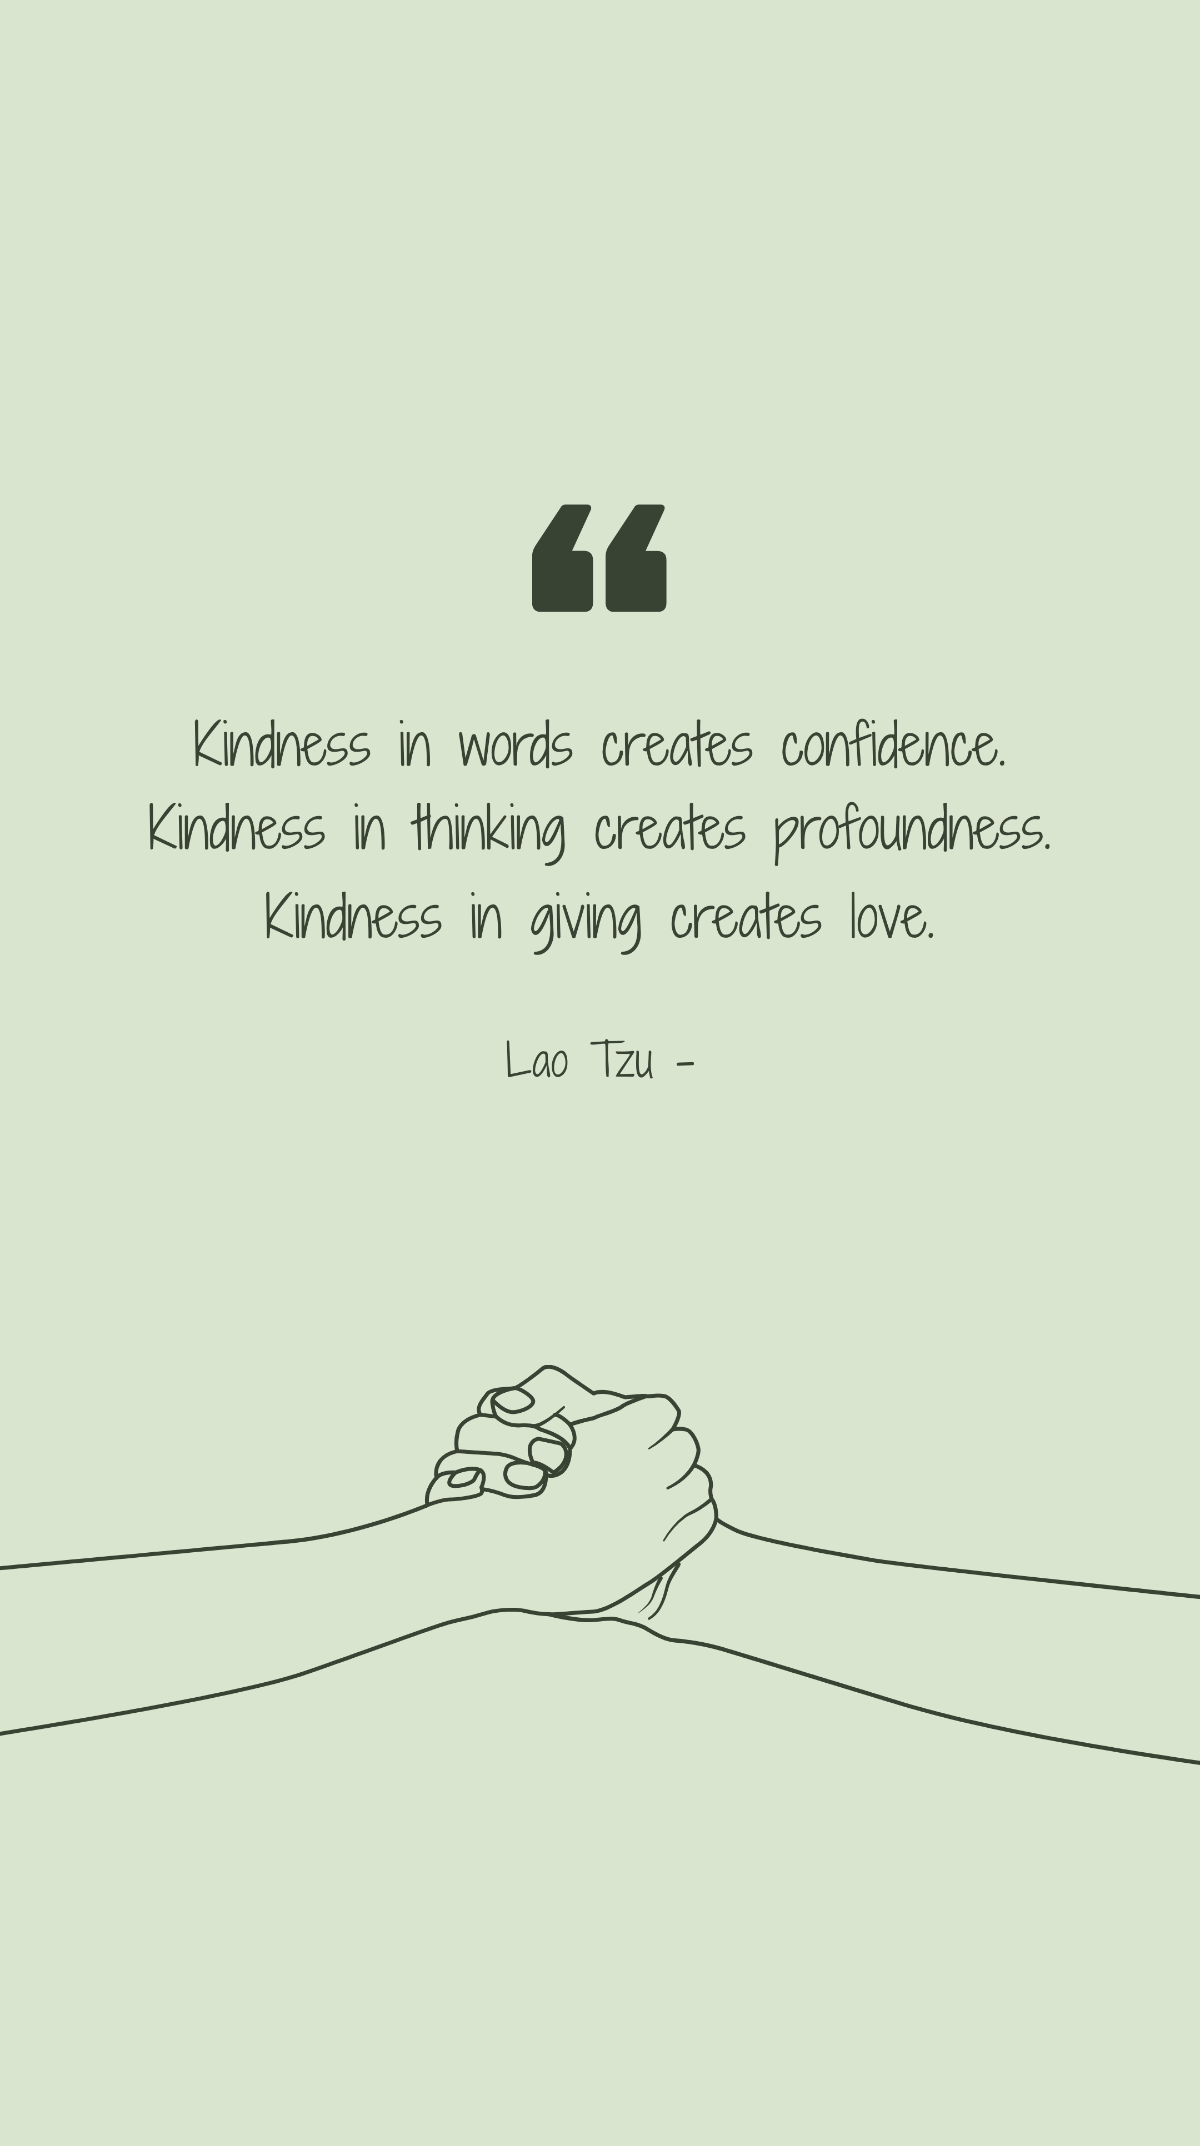 Lao Tzu - Kindness in words creates confidence. Kindness in thinking creates profoundness. Kindness in giving creates love.